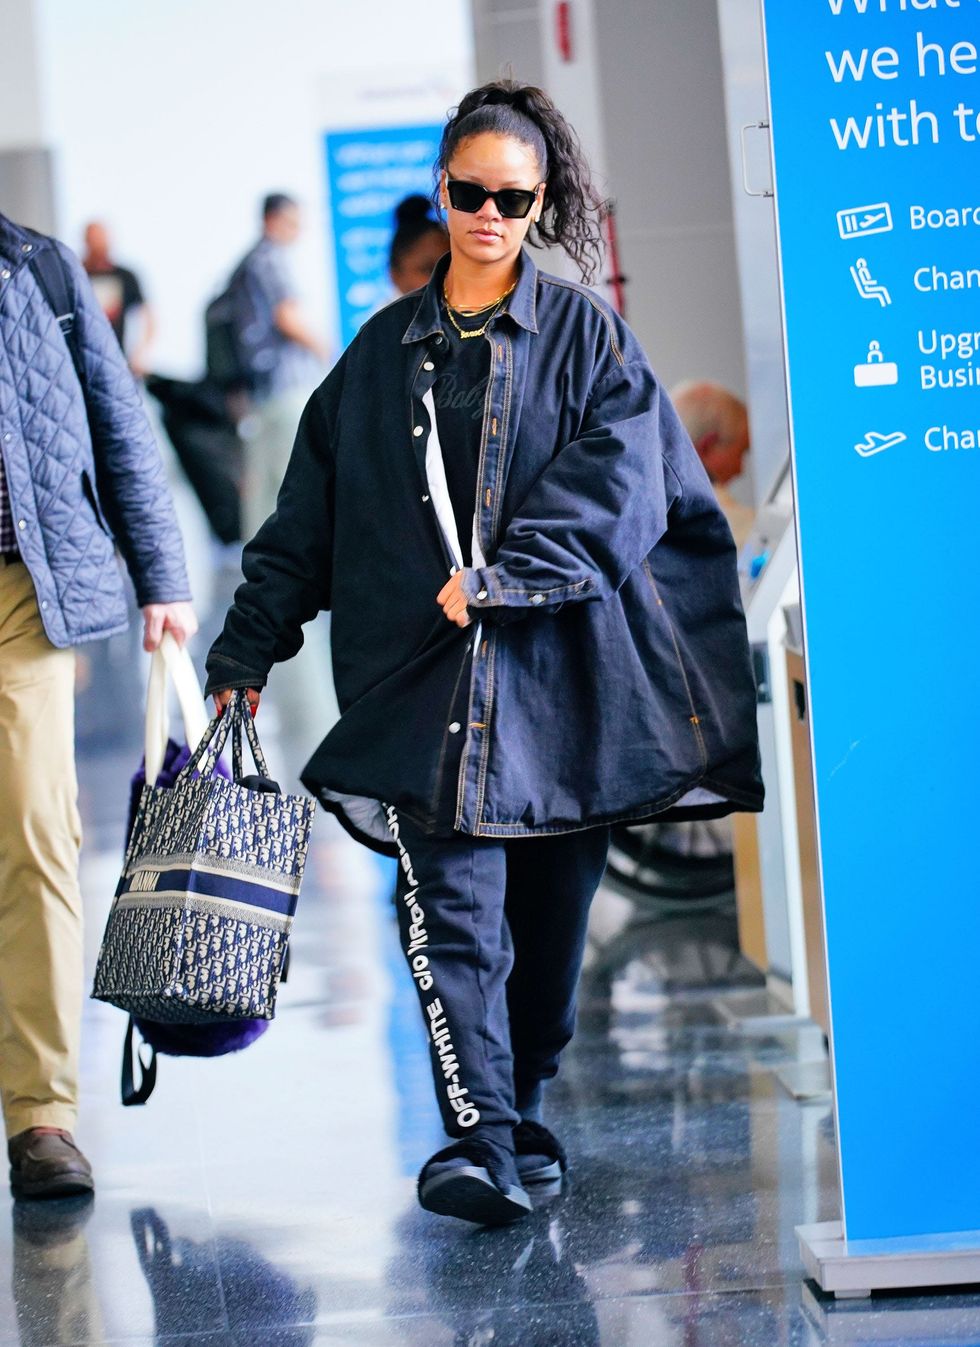 Celebrity Airport Outfits You Should Copy for Your Summer Vacay - Brit + Co